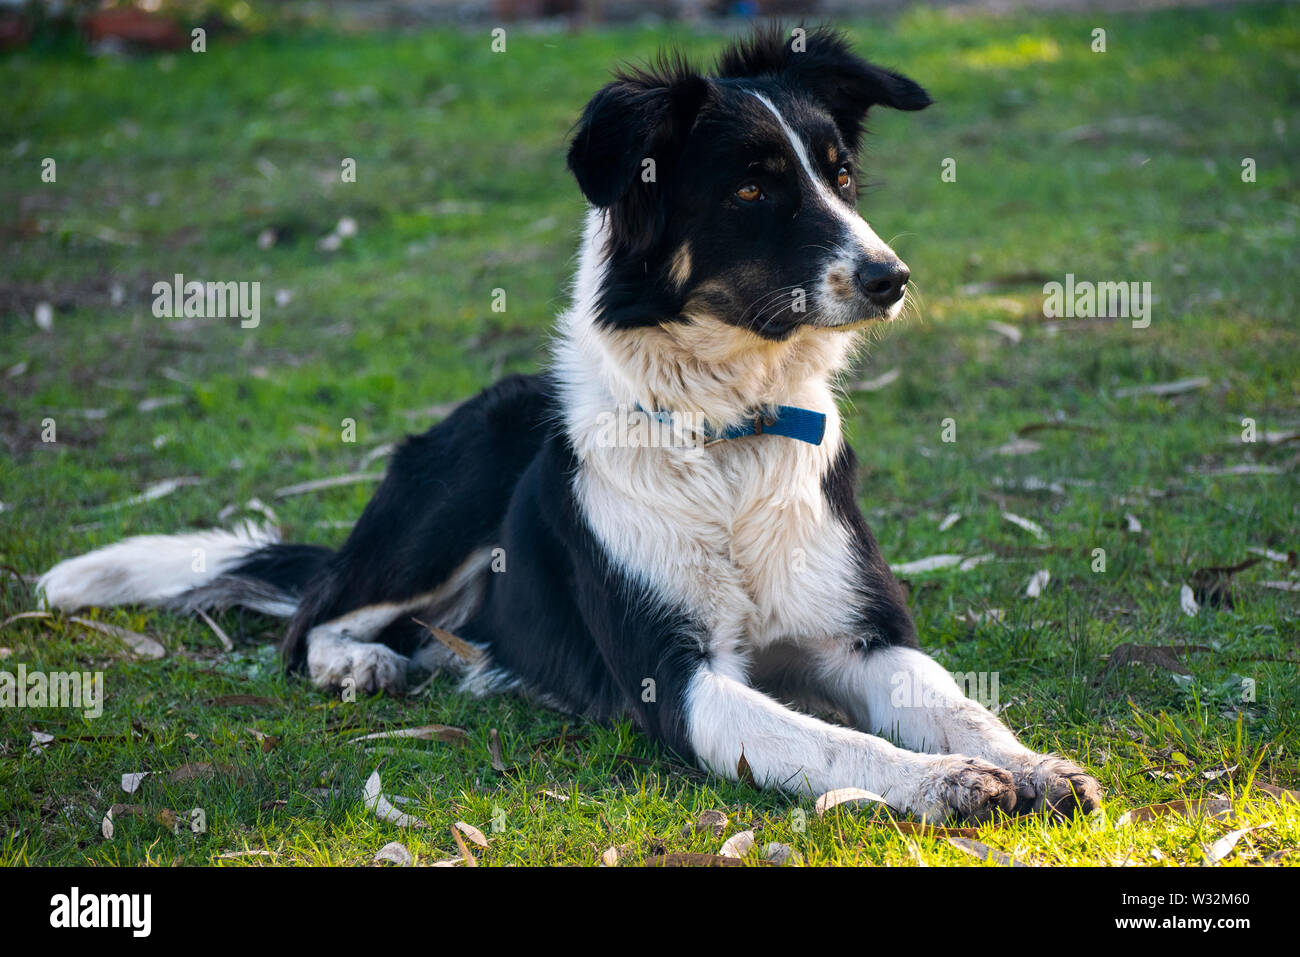 Border collie dog race in alert attitude. The border collie is the most intelligent breed, ideal for work and company. Usually black and white. Stock Photo